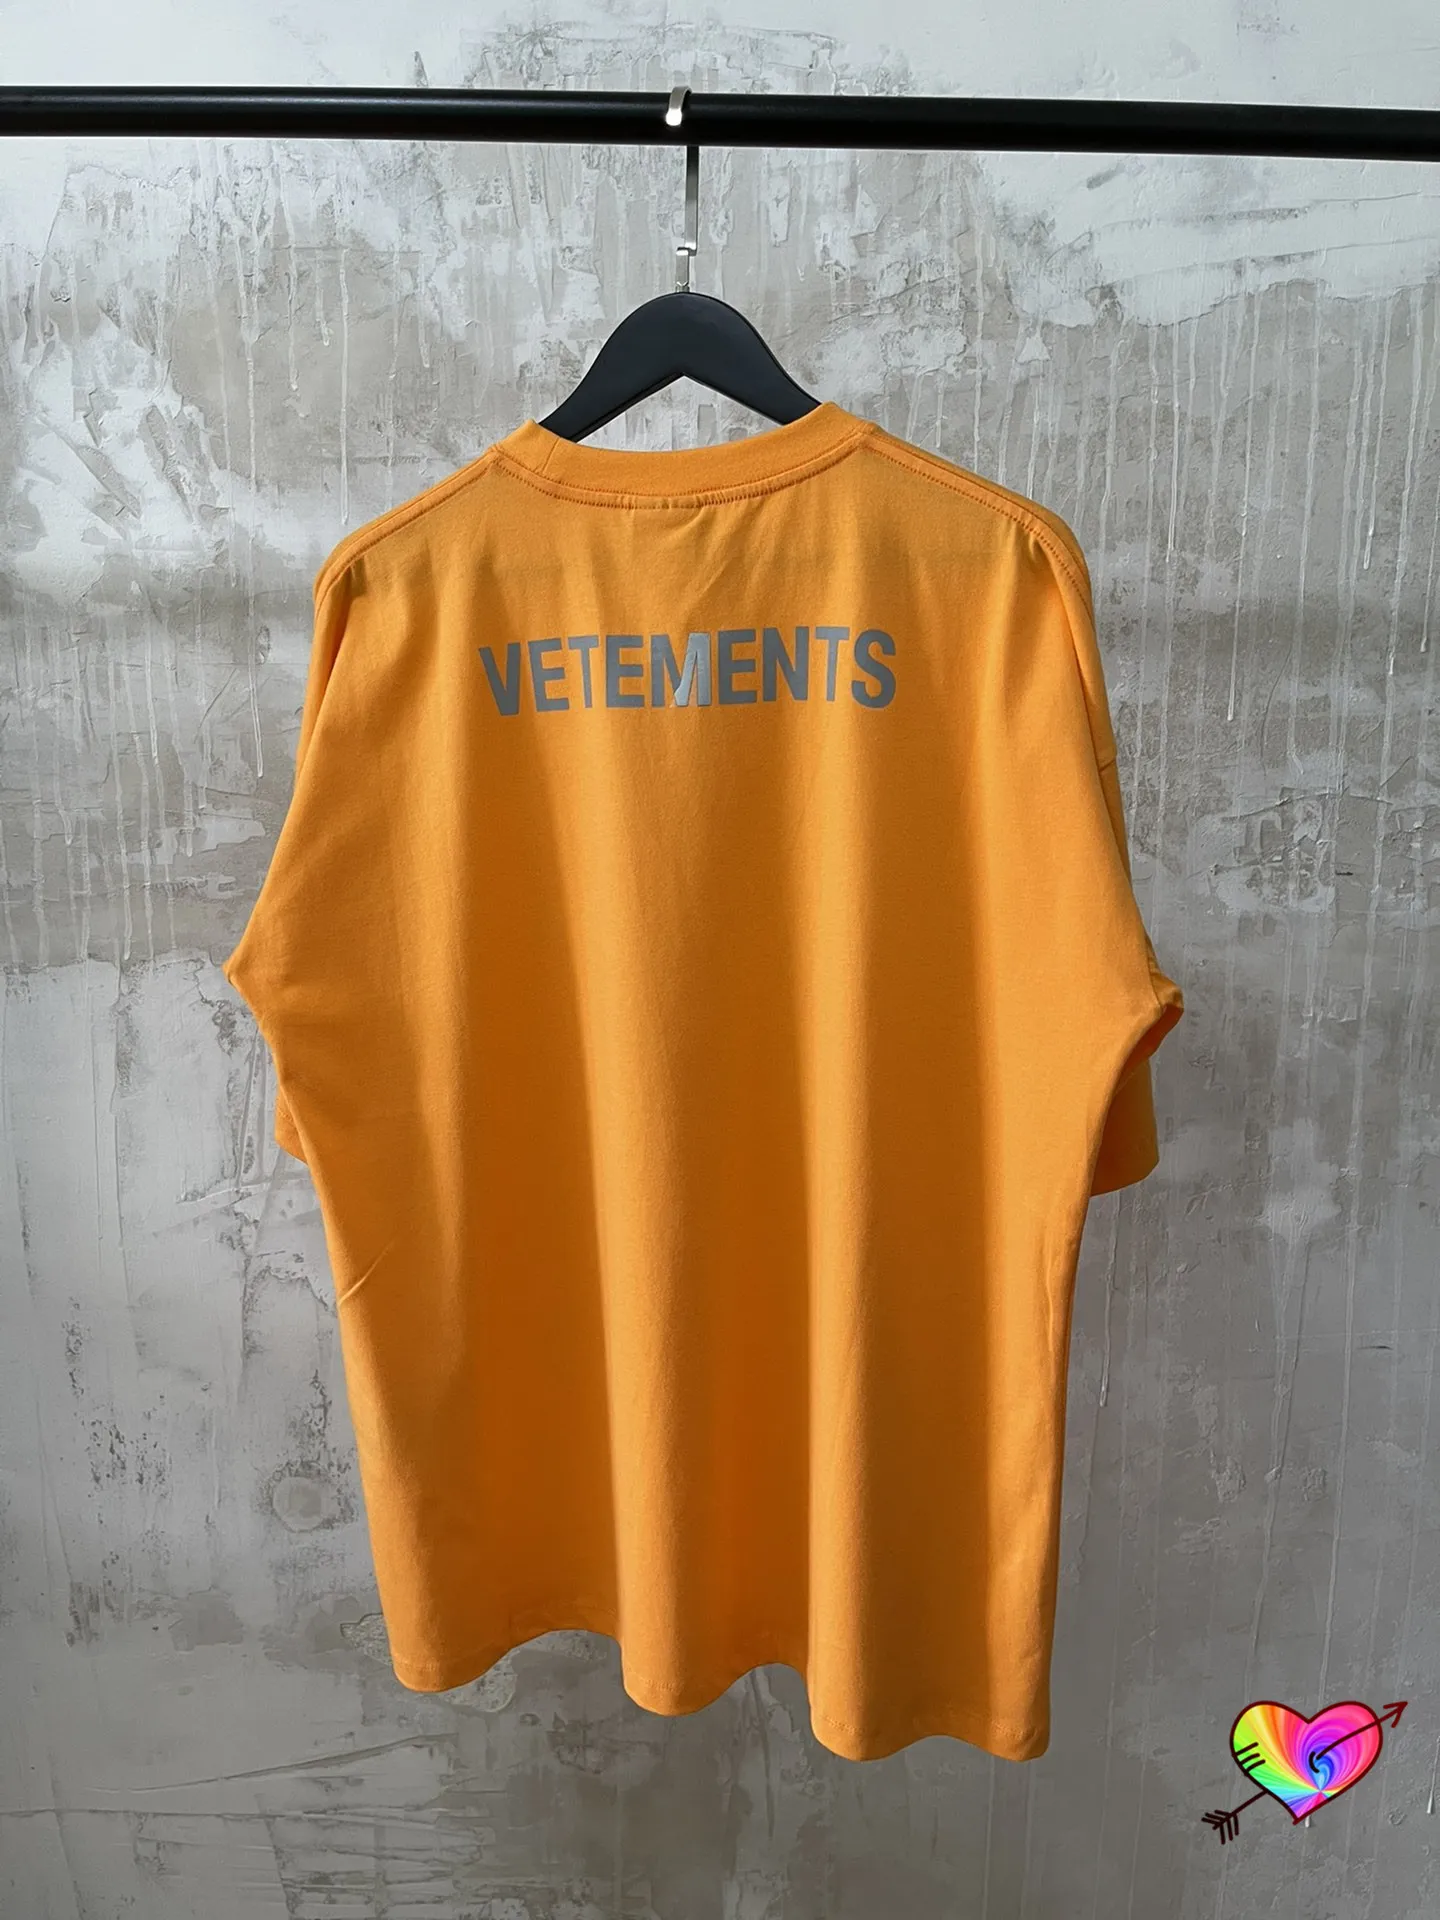 Casual Print Orange T-shirt Men Women High Quality Reflective Fonts Tee Oversize Tops Thick Fabric